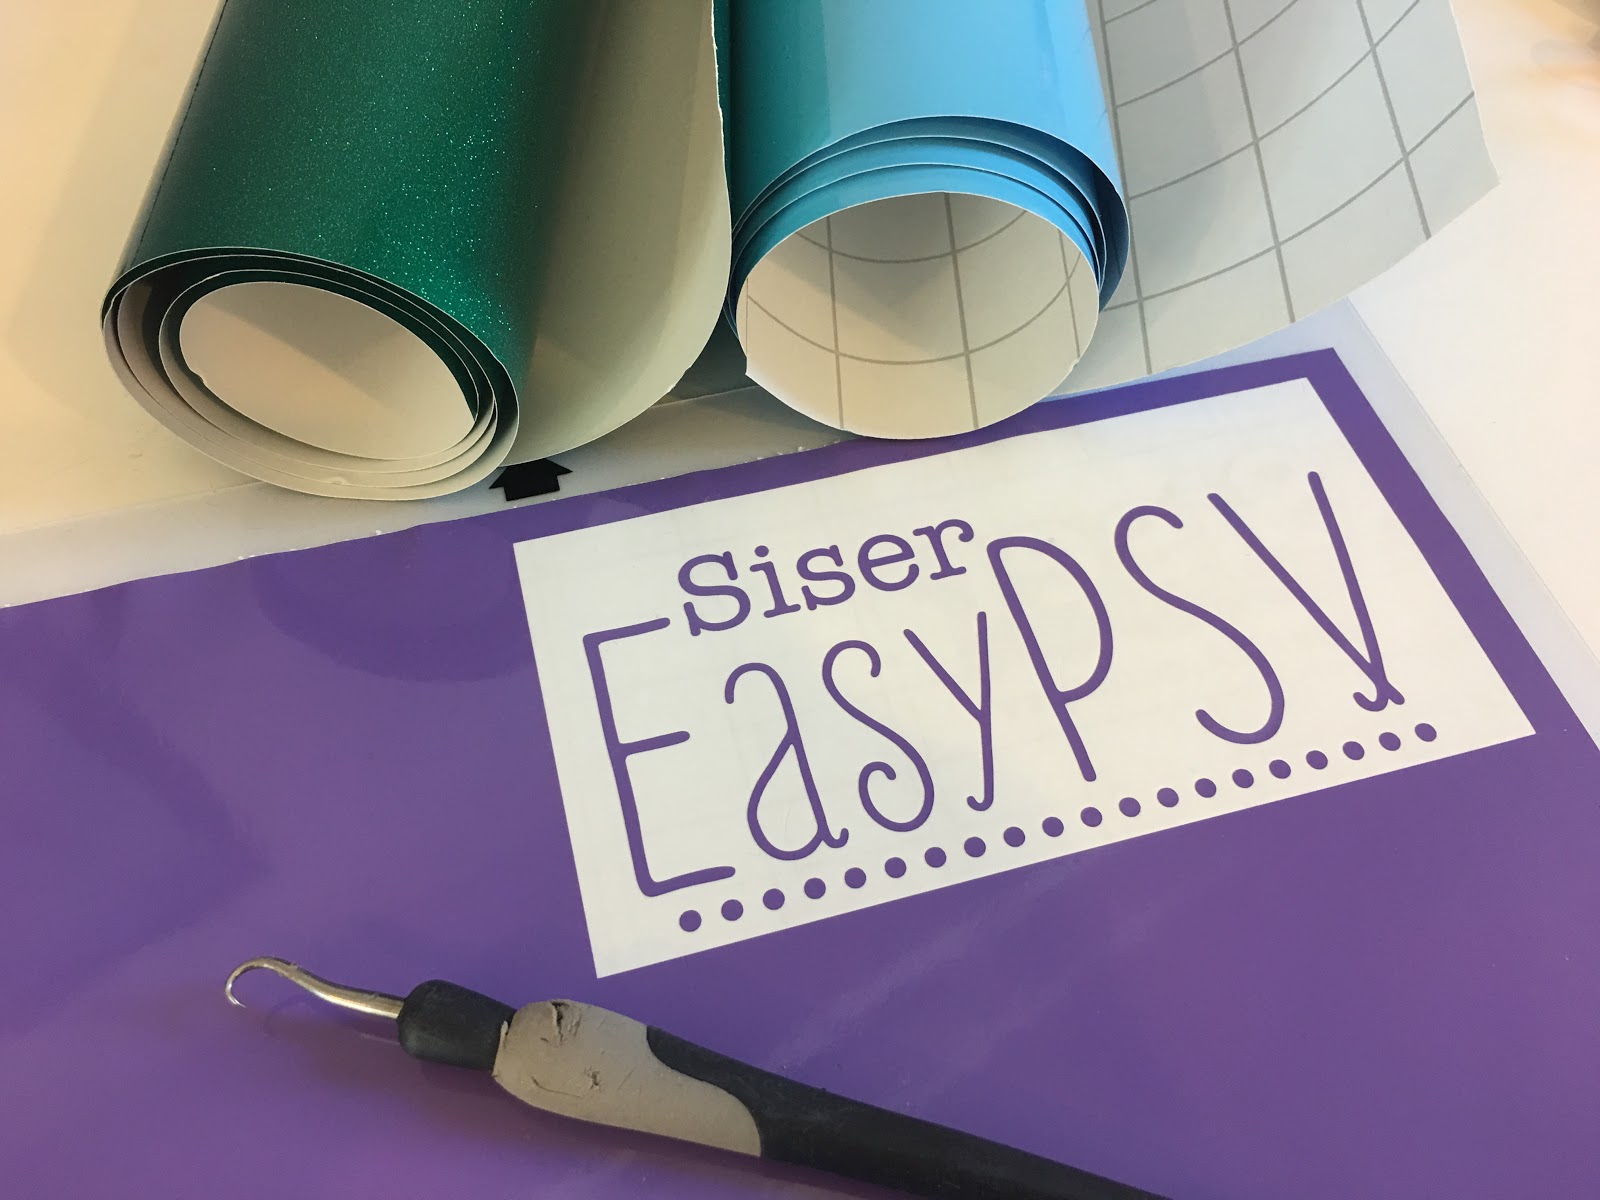 How to Use Adhesive Vinyl: A Beginner's Guide to Cutting and Applying Vinyl  Decals - Persia Lou